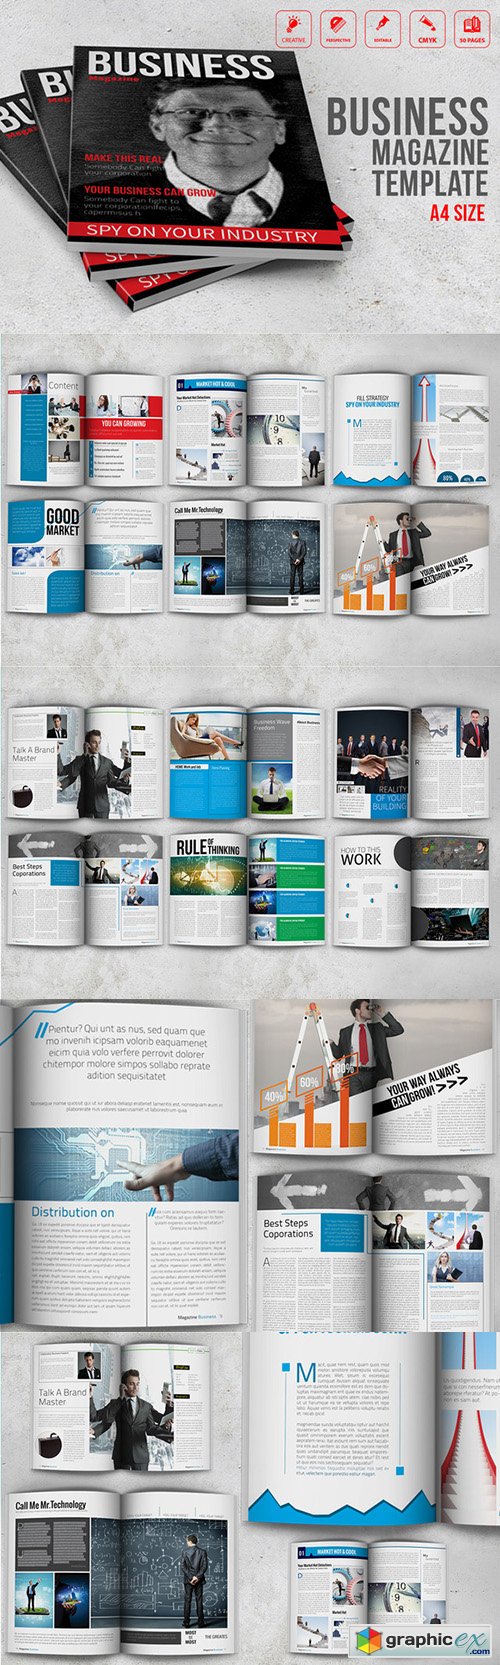 business-magazine-template-free-download-vector-stock-image-photoshop